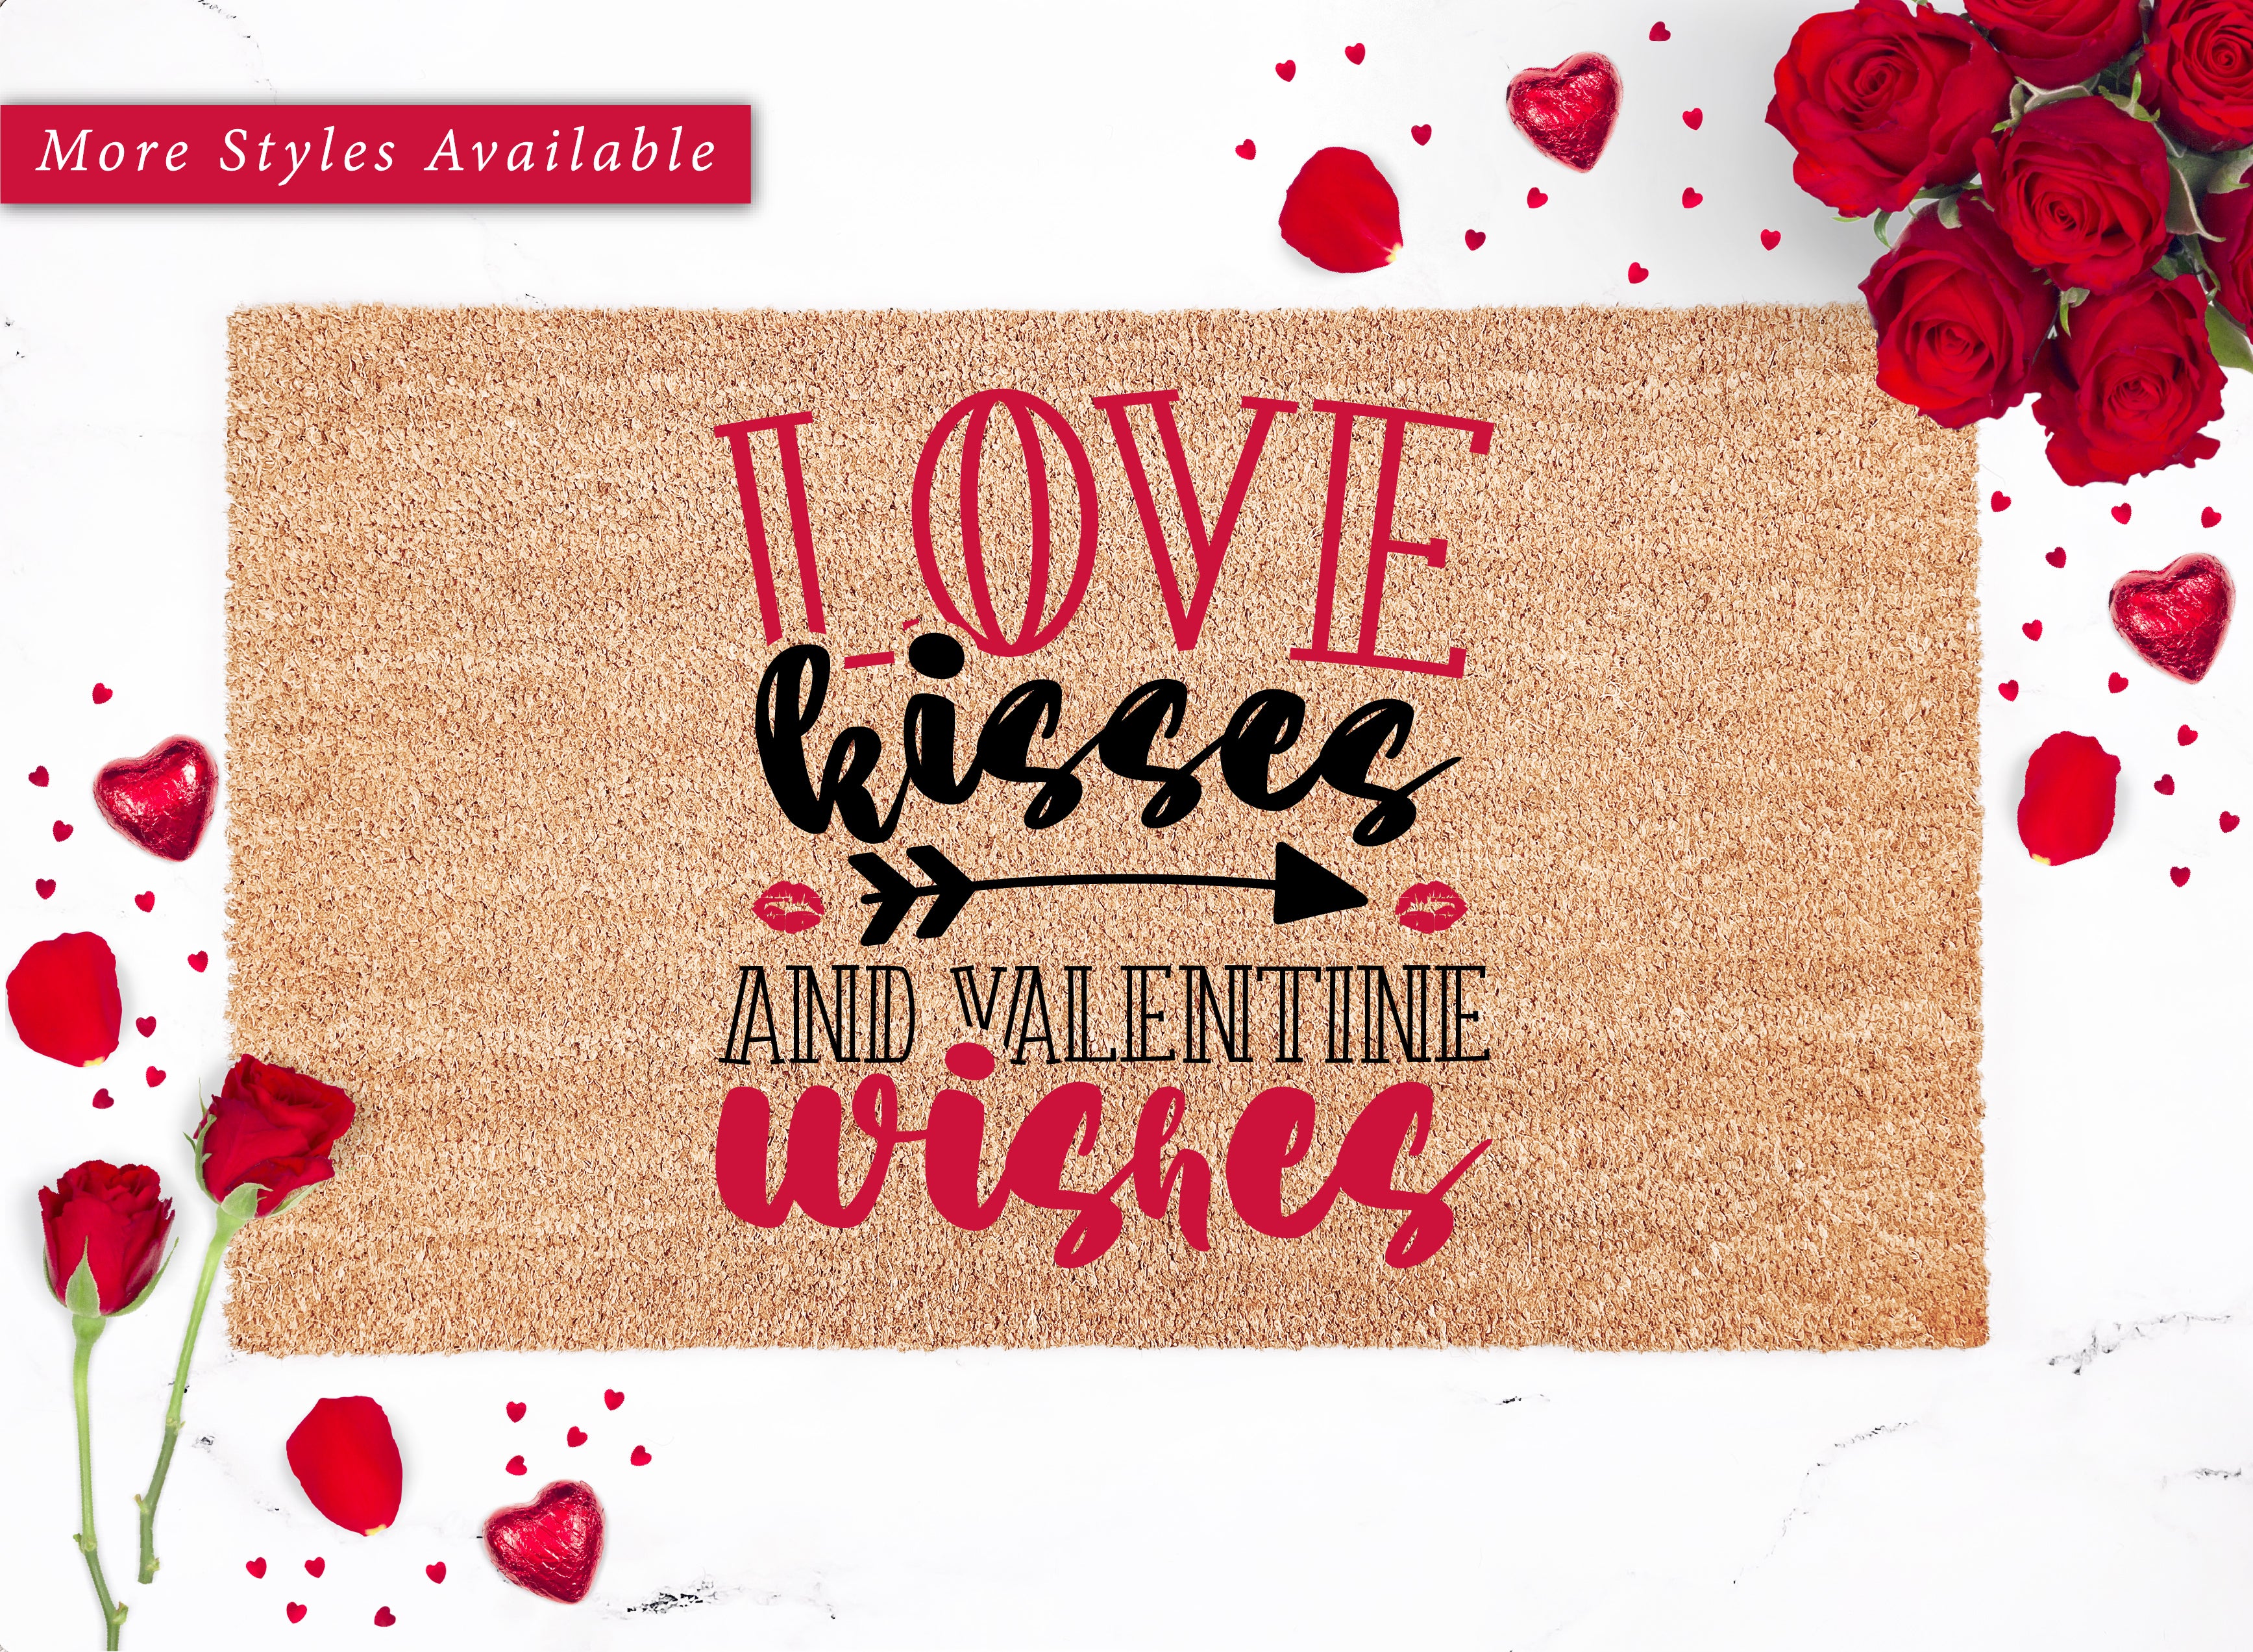 Love Kisses and Valentines Wishes Doormat